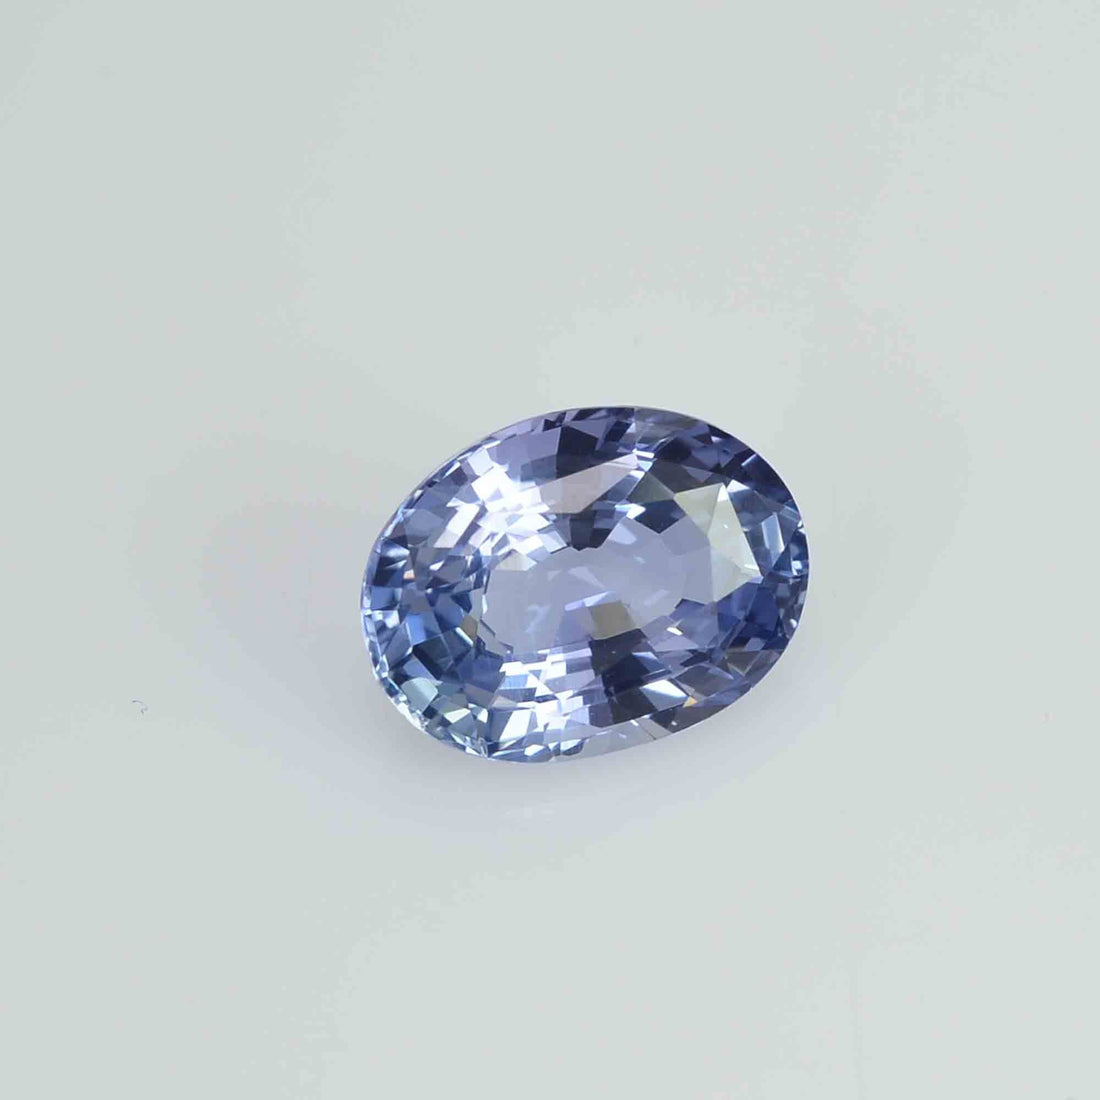 2.27 cts Unheated Natural Blue Sapphire Loose Gemstone Oval Cut Certified